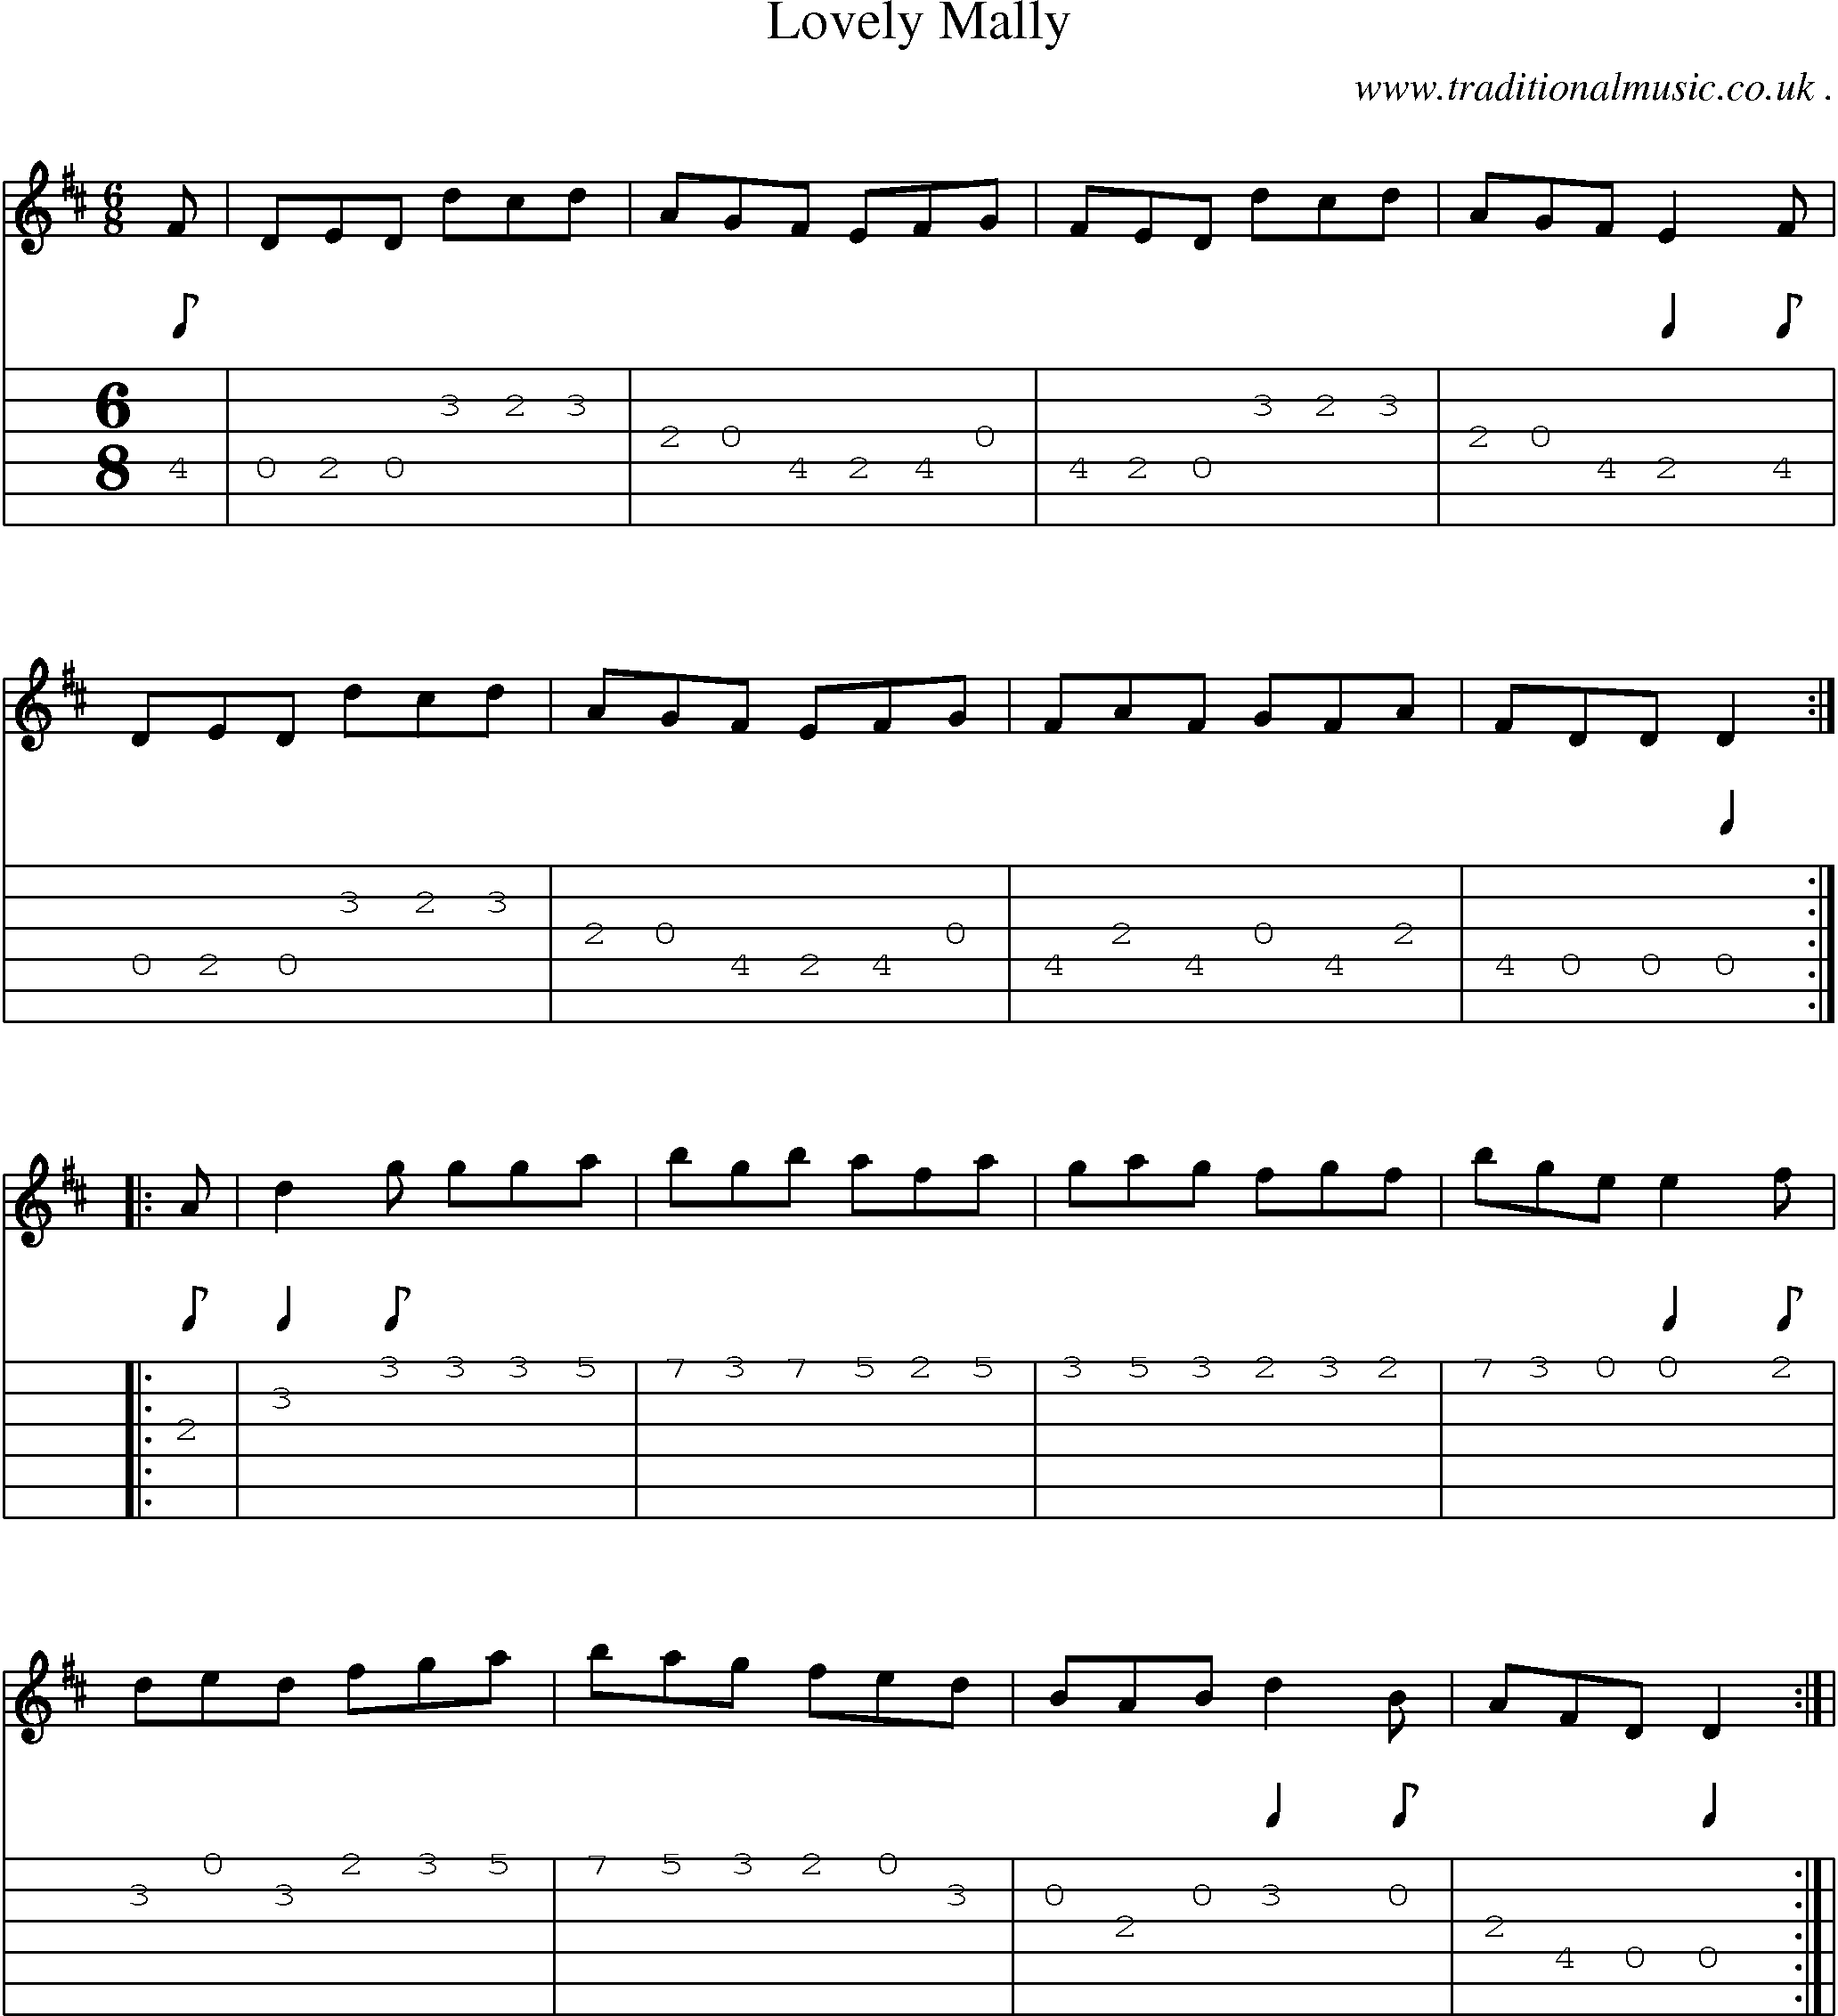 Sheet-Music and Guitar Tabs for Lovely Mally